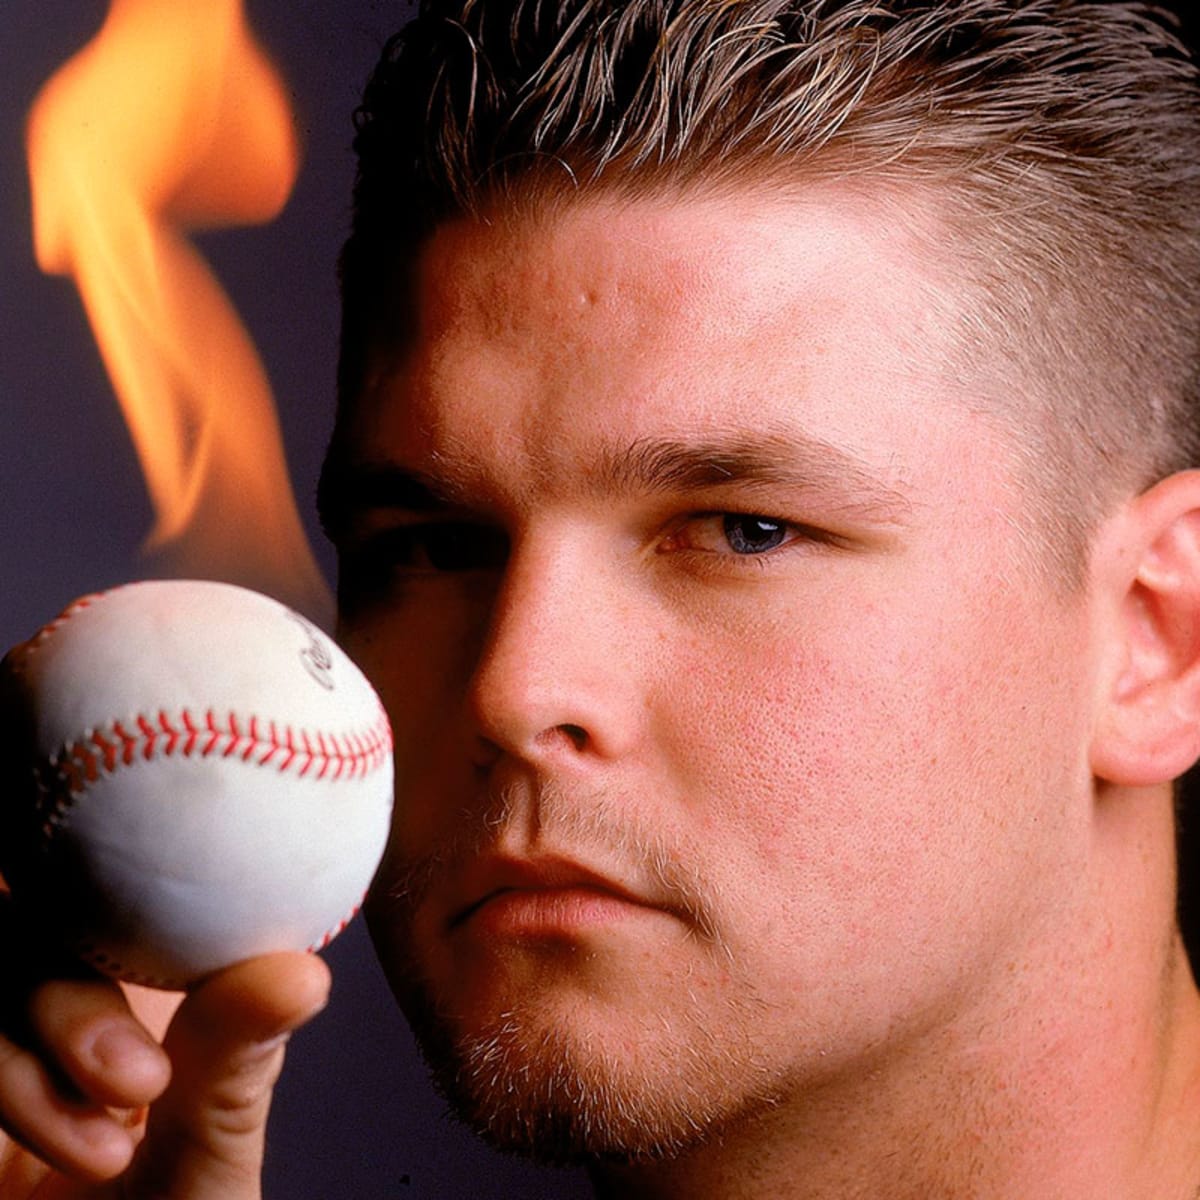 For Cubs fans, 25 years has only made us appreciate Kerry Wood's